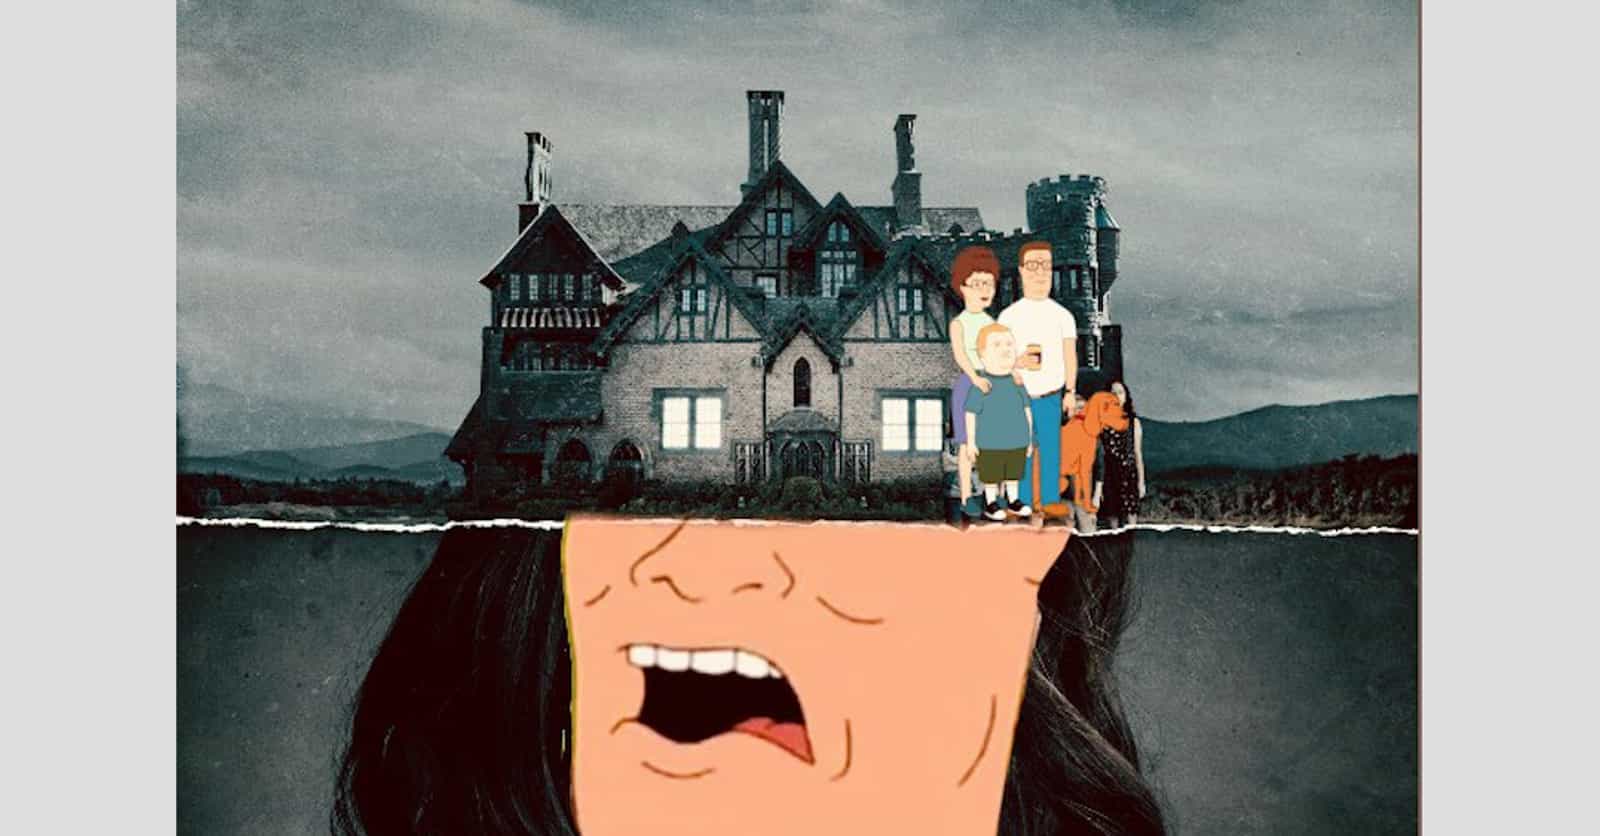 The Funniest Tweets About 'The Haunting of Hill House'